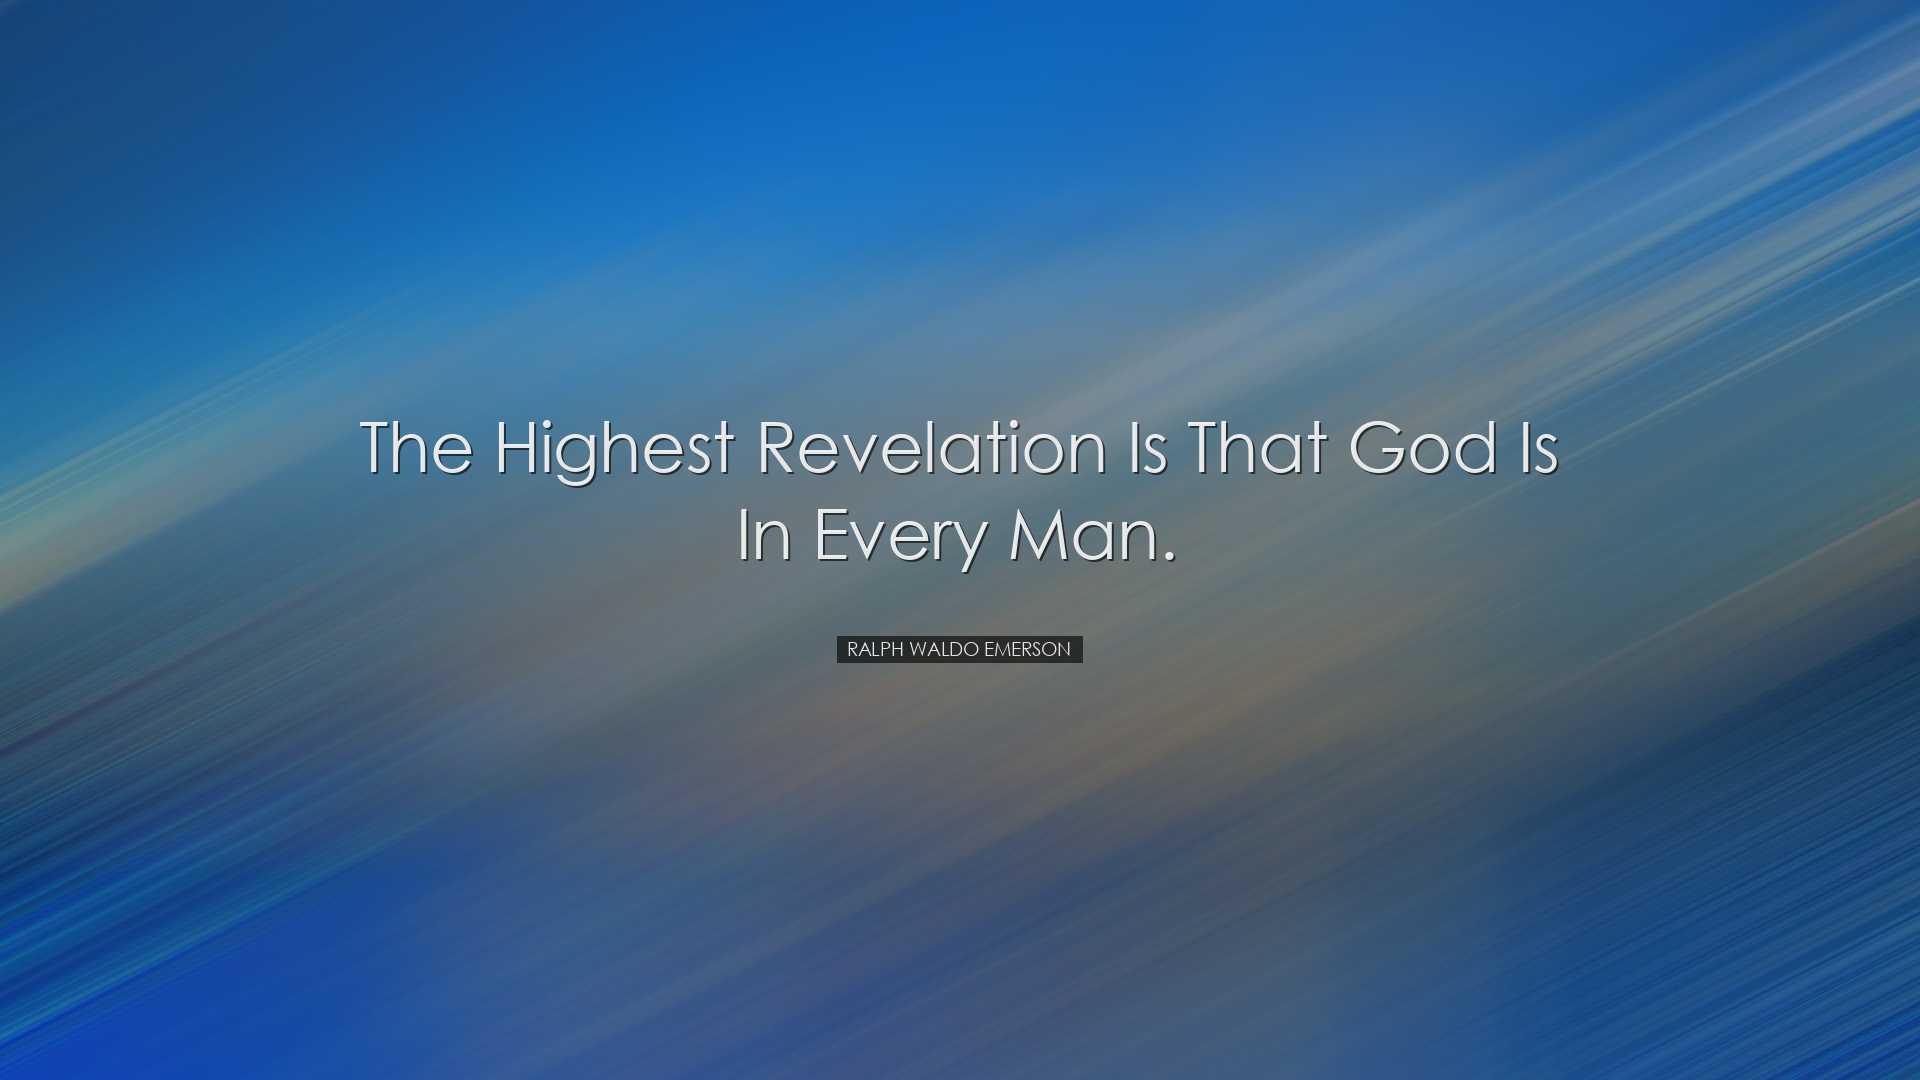 The highest revelation is that God is in every man. - Ralph Waldo